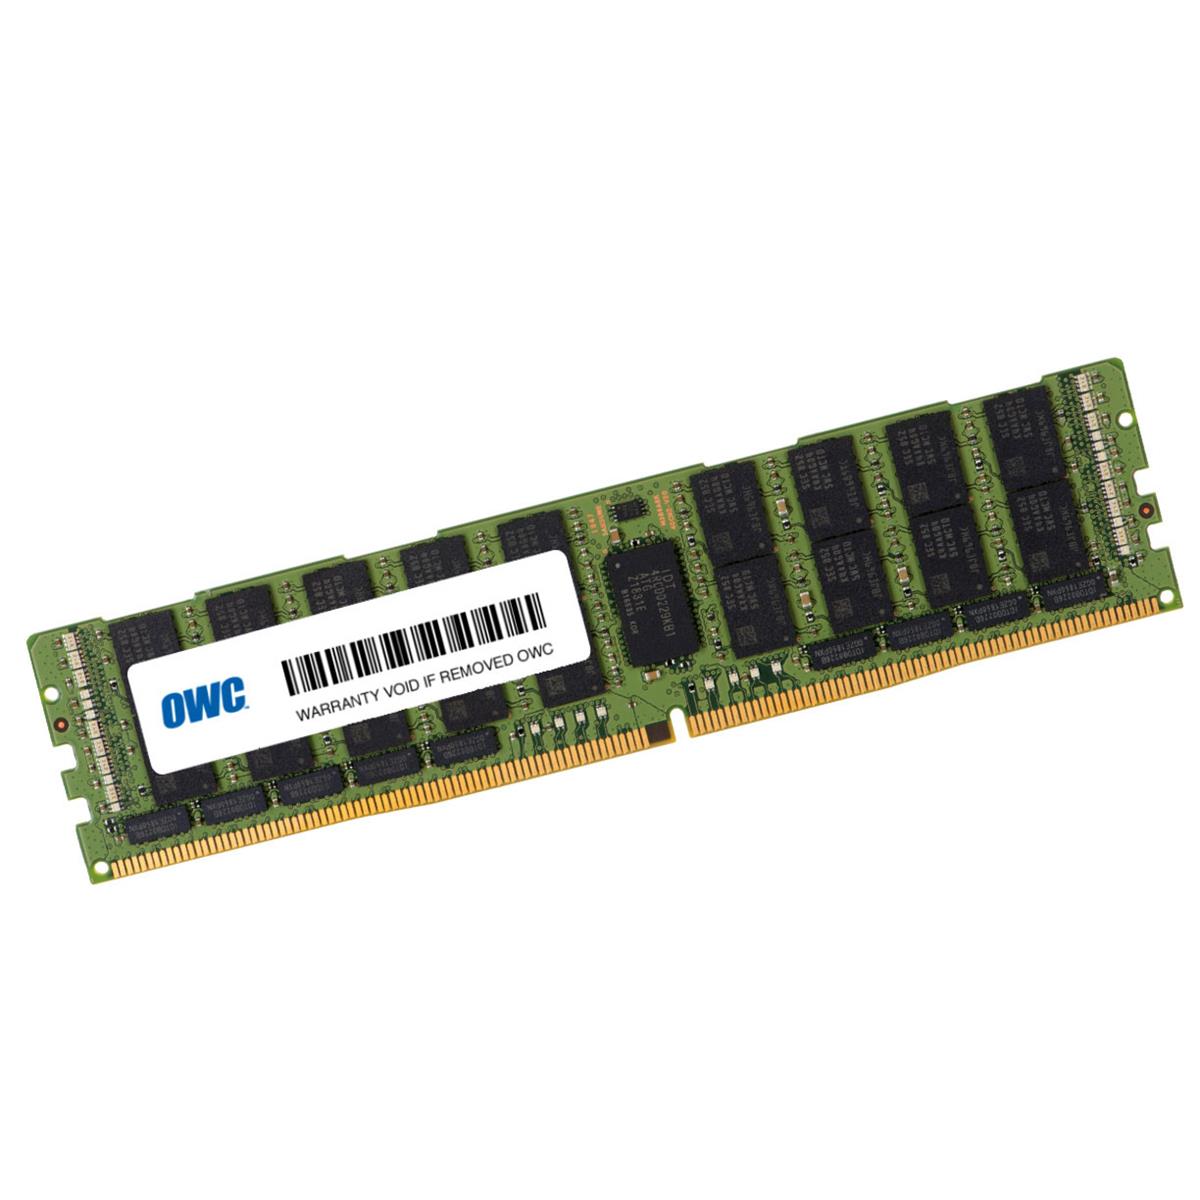 

OWC / Other World Computing OWC 64GB 288-Pin LRDIMM DDR4 (PC23400) 2933MHz Memory Upgrade Kit